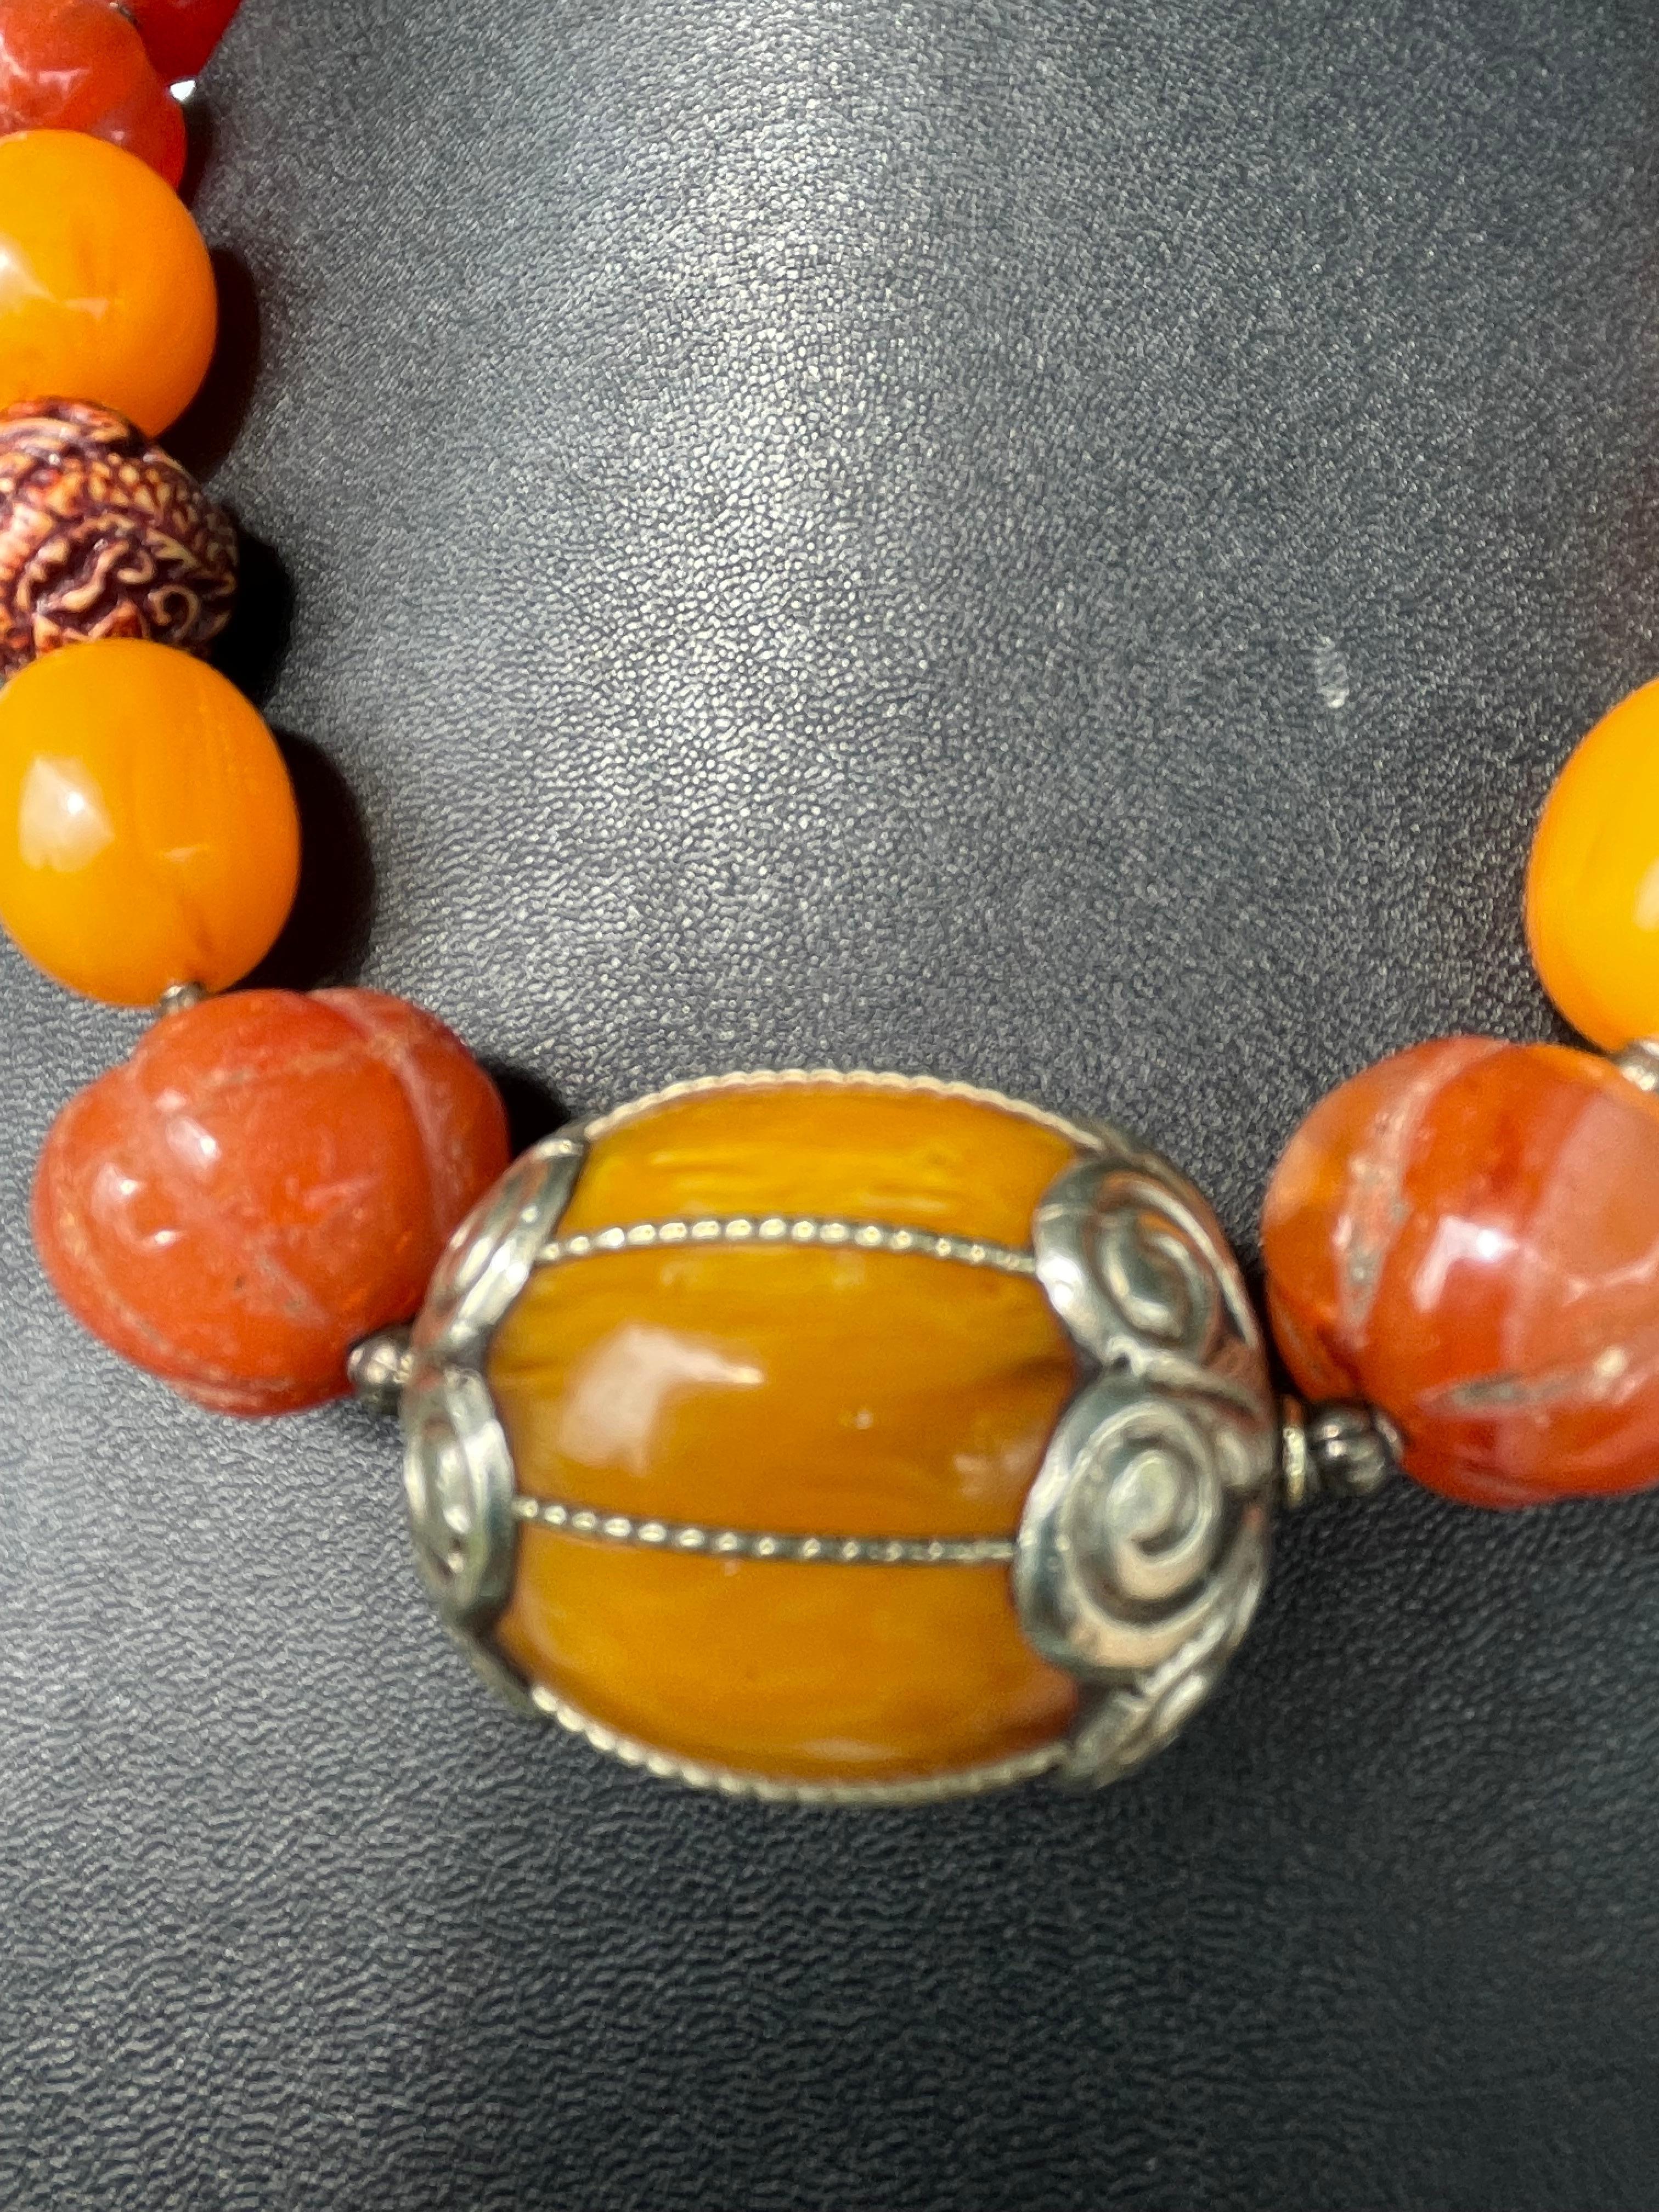 Tribal style vintage Bakelite and Amber beads 
Comprise this handmade, one of a kind necklace.A fabulous center bead of Indian amber with silver end caps is flanked by vintage Tibetan gourd shape carved carnelian beads. A vintage carved nut bead